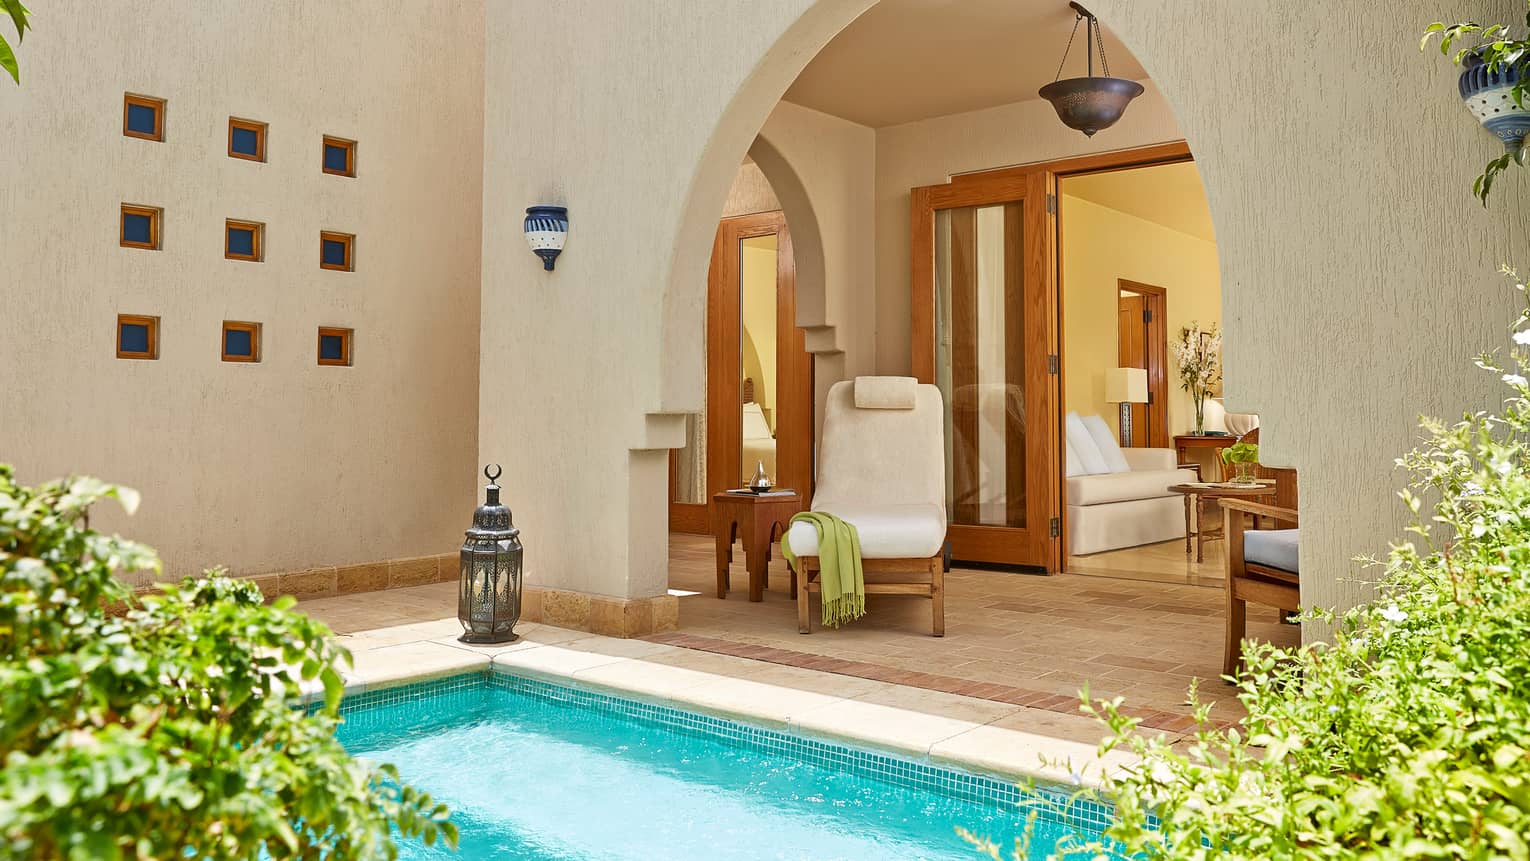 One-Bedroom Suite With Plunge Pool, plush pool chair by corner of turquoise swimming pool